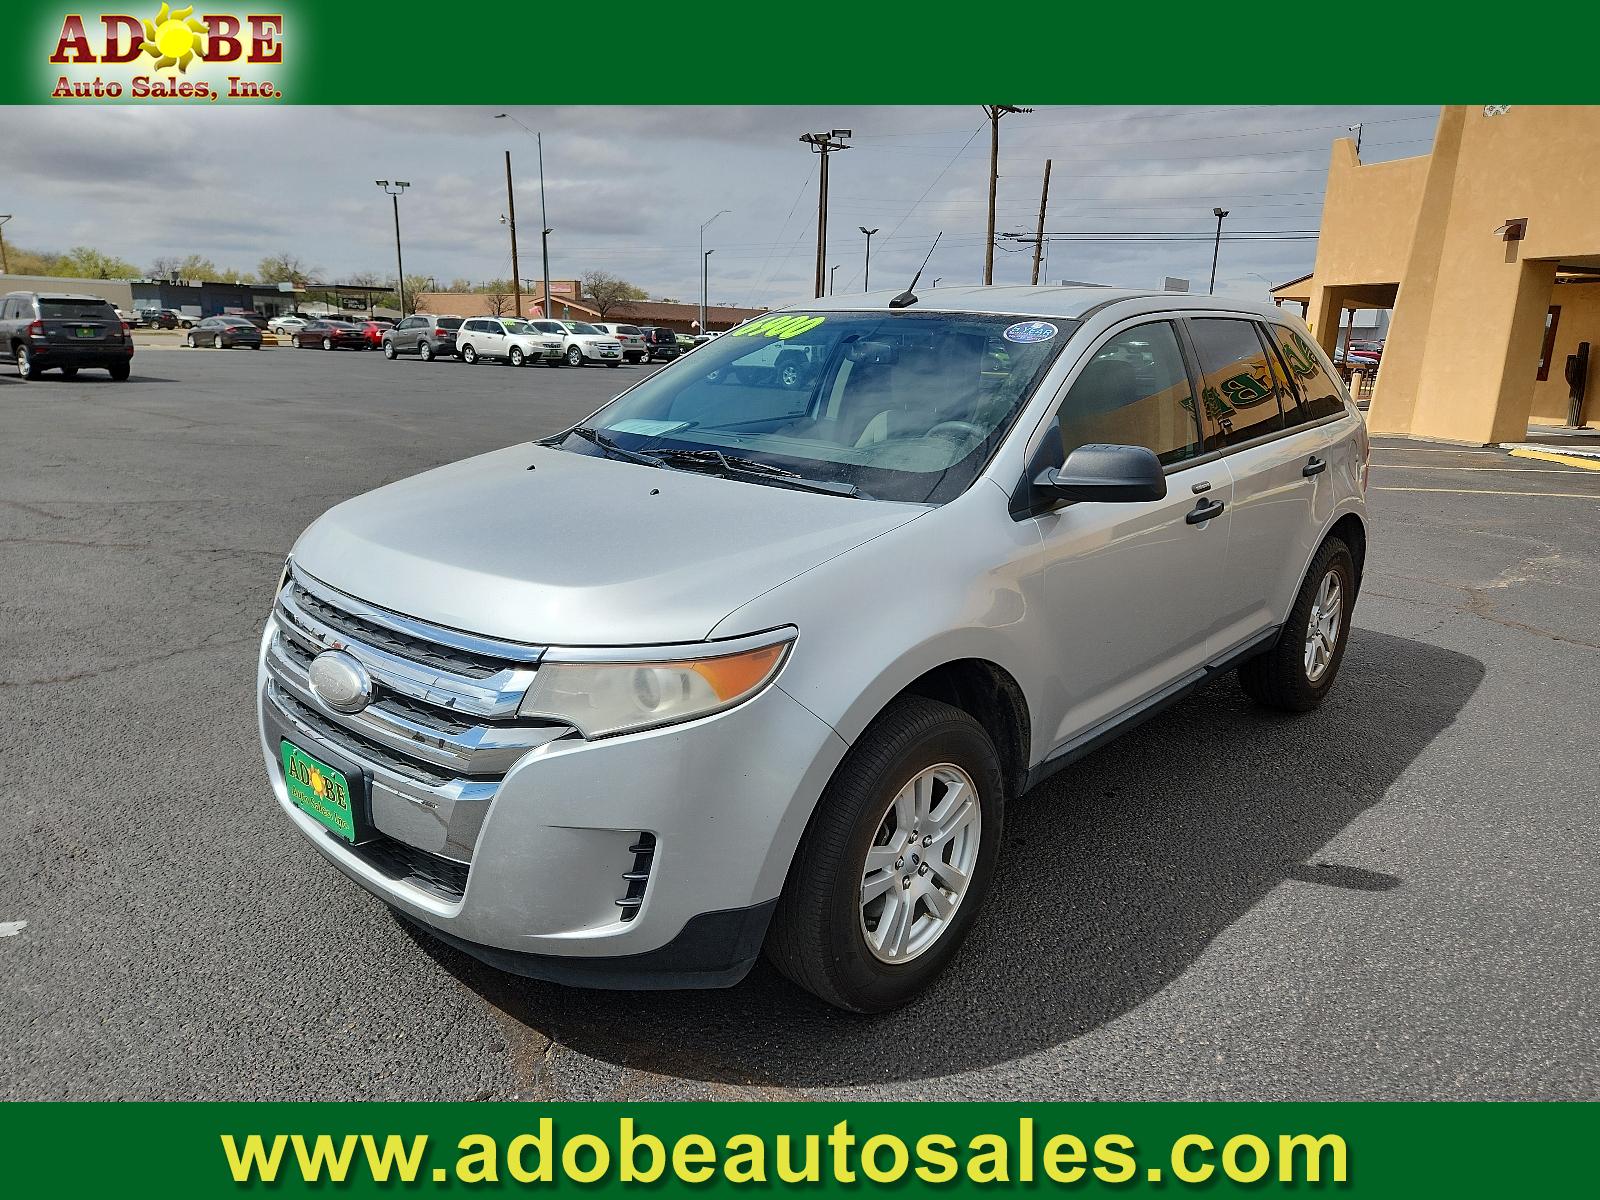 photo of 2012 Ford Edge 4dr SE FWD